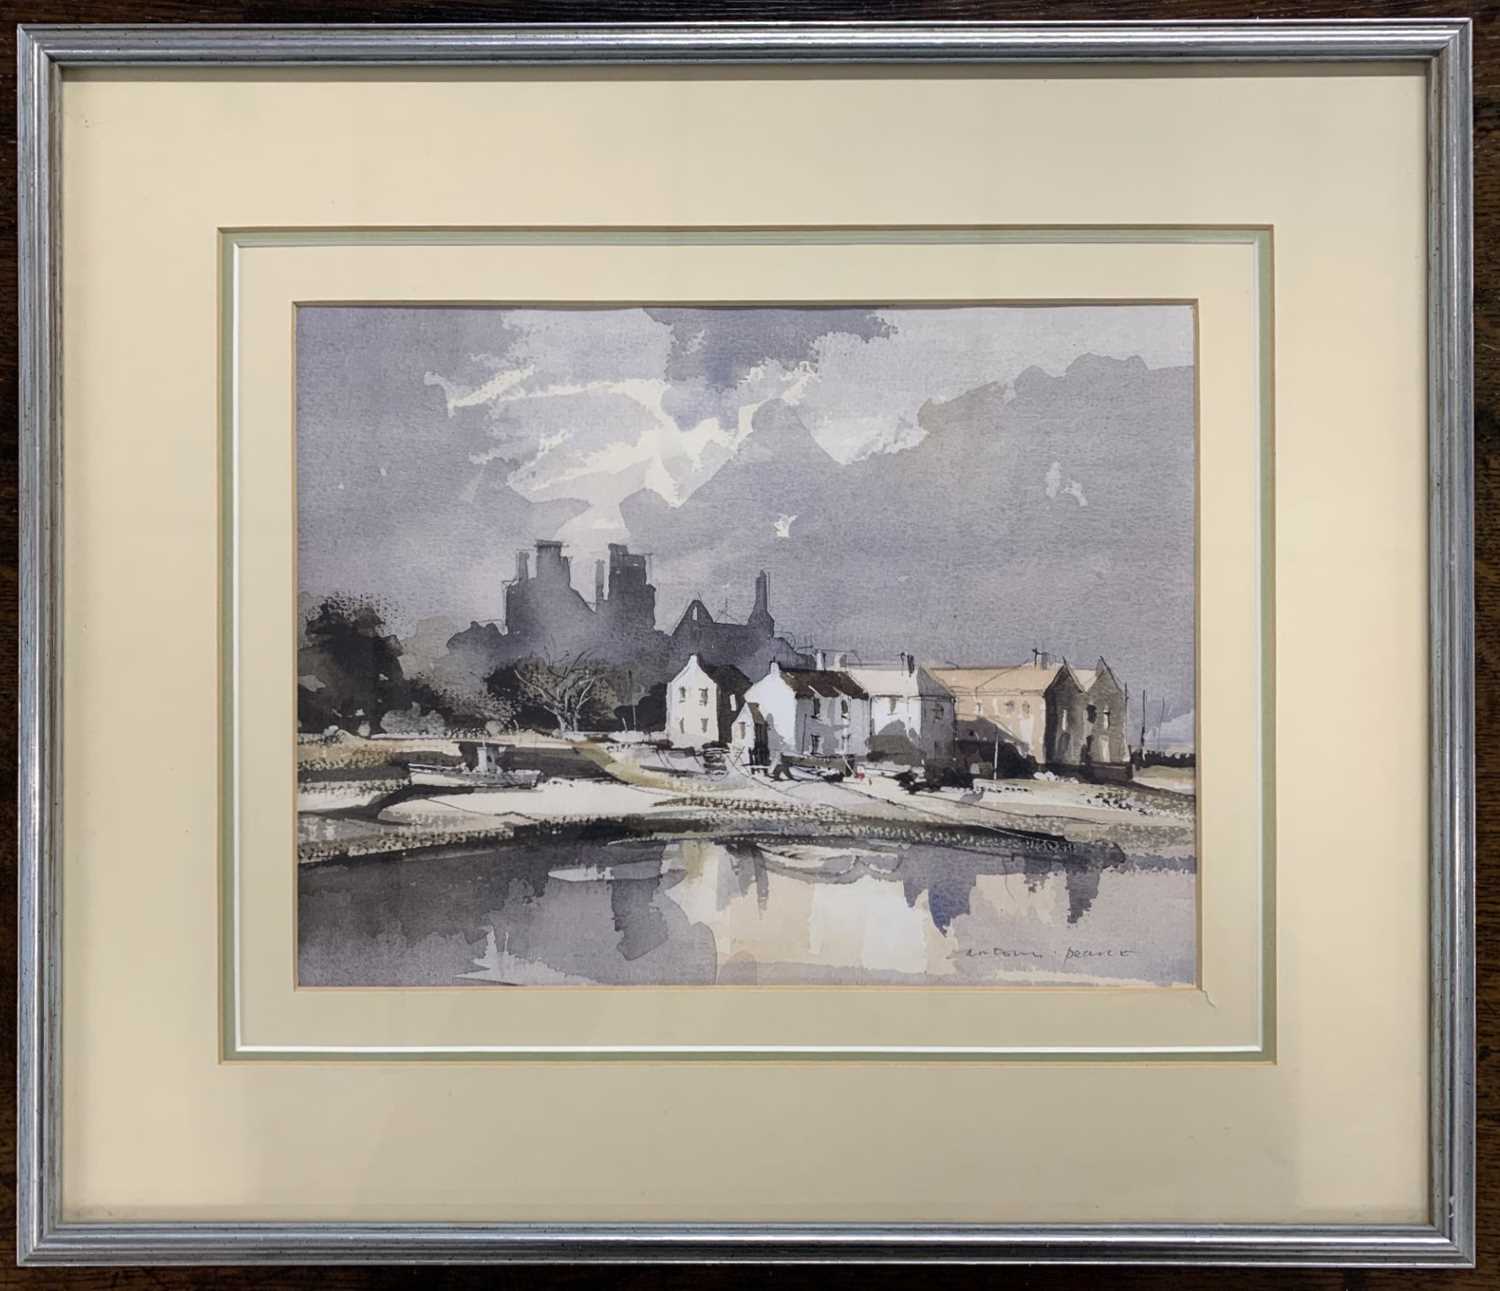 Anthony Pearce FRSA (British,1933-2019), 'Kirkcubright, River Dee', watercolour, 24X31cm, framed and